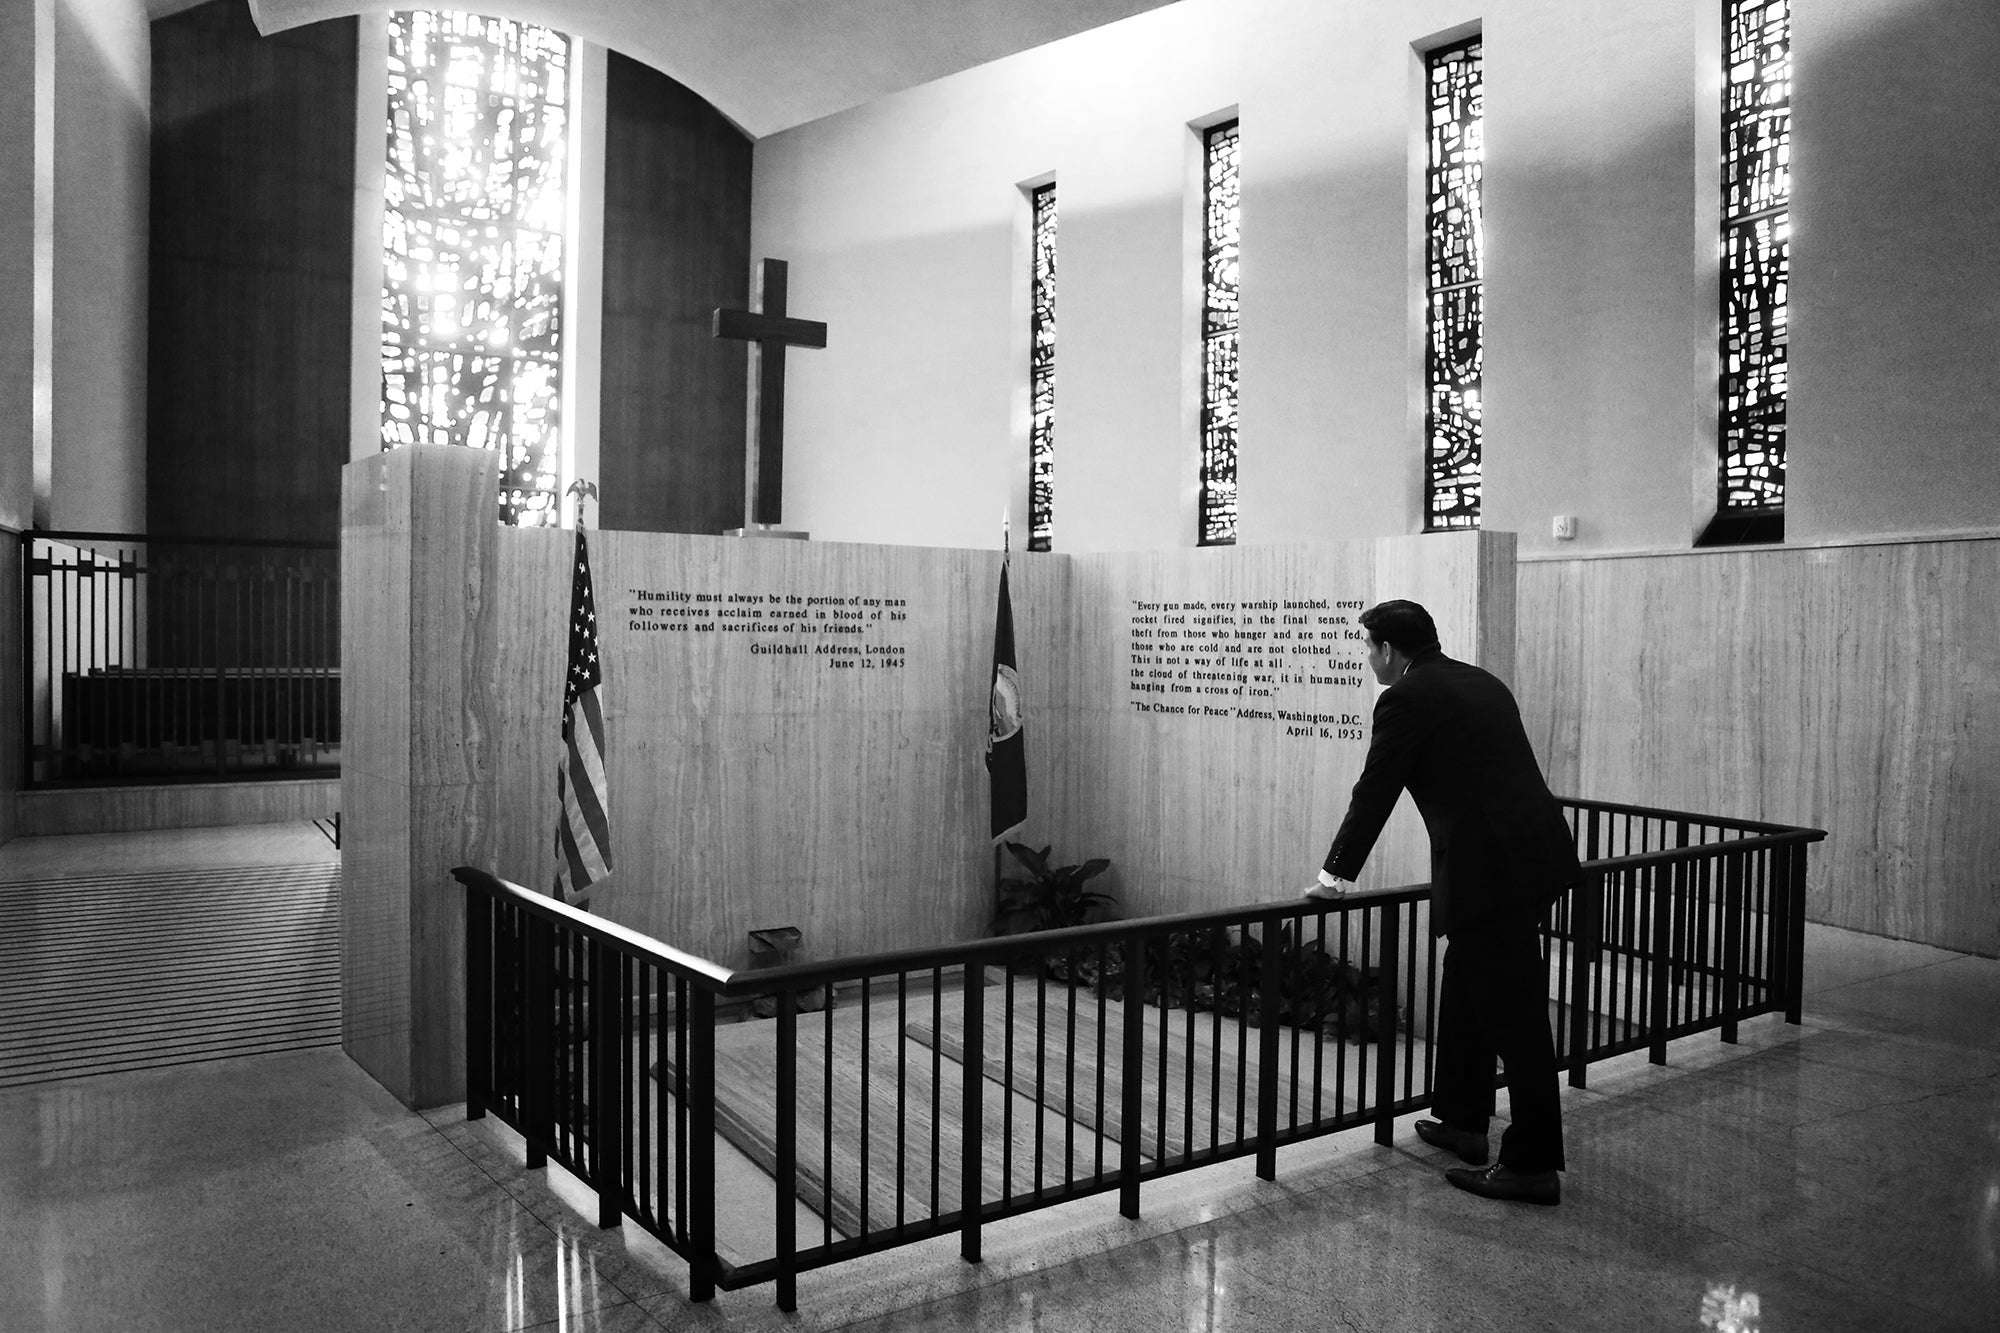 A Moment of Reflection in Ike’s Chapel